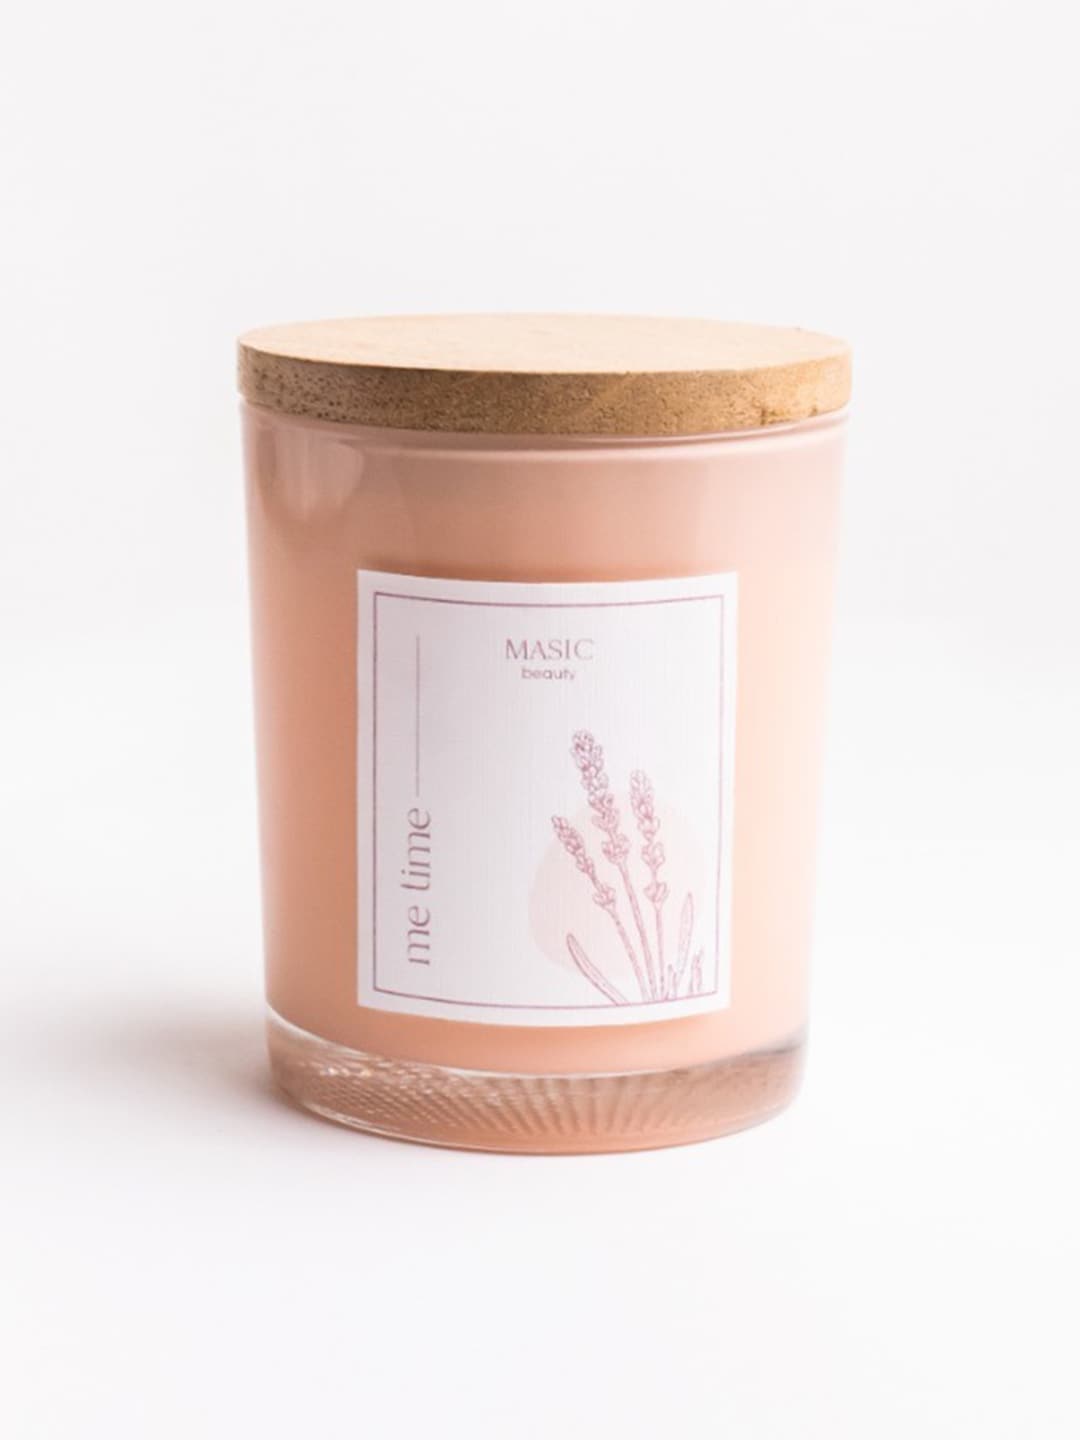 MASIC beauty Cruelty-Free Unwind With Me Time 2-Wick Jar Candle - 200 g Price in India